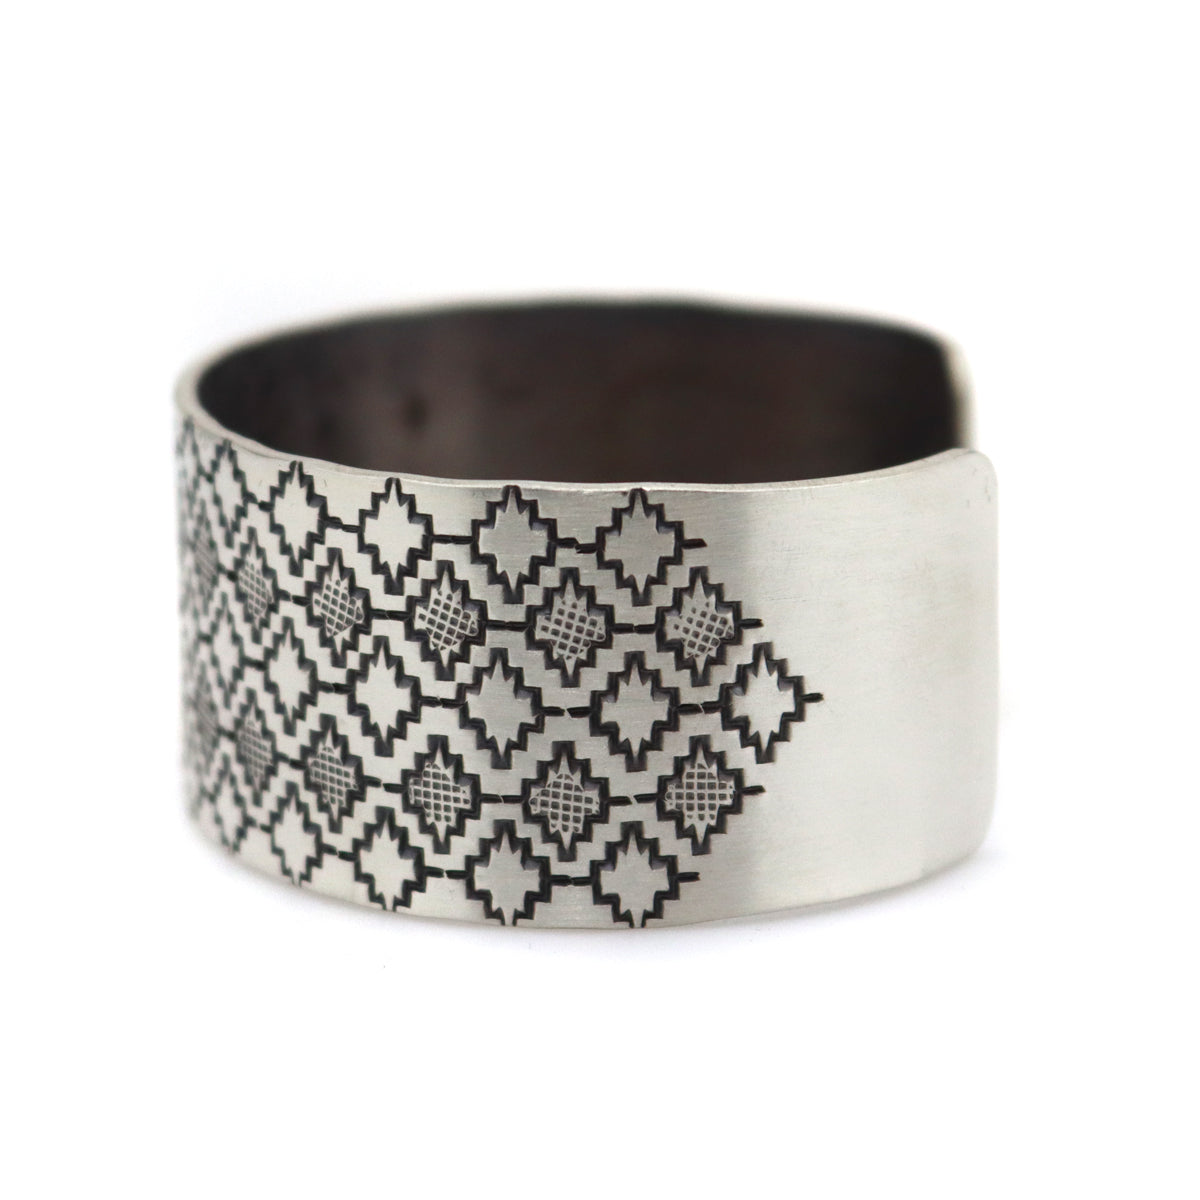 Roland Begay - Navajo Contemporary Sterling Silver Bracelet with Stamped Design, size 6.75 (J13539) 1
